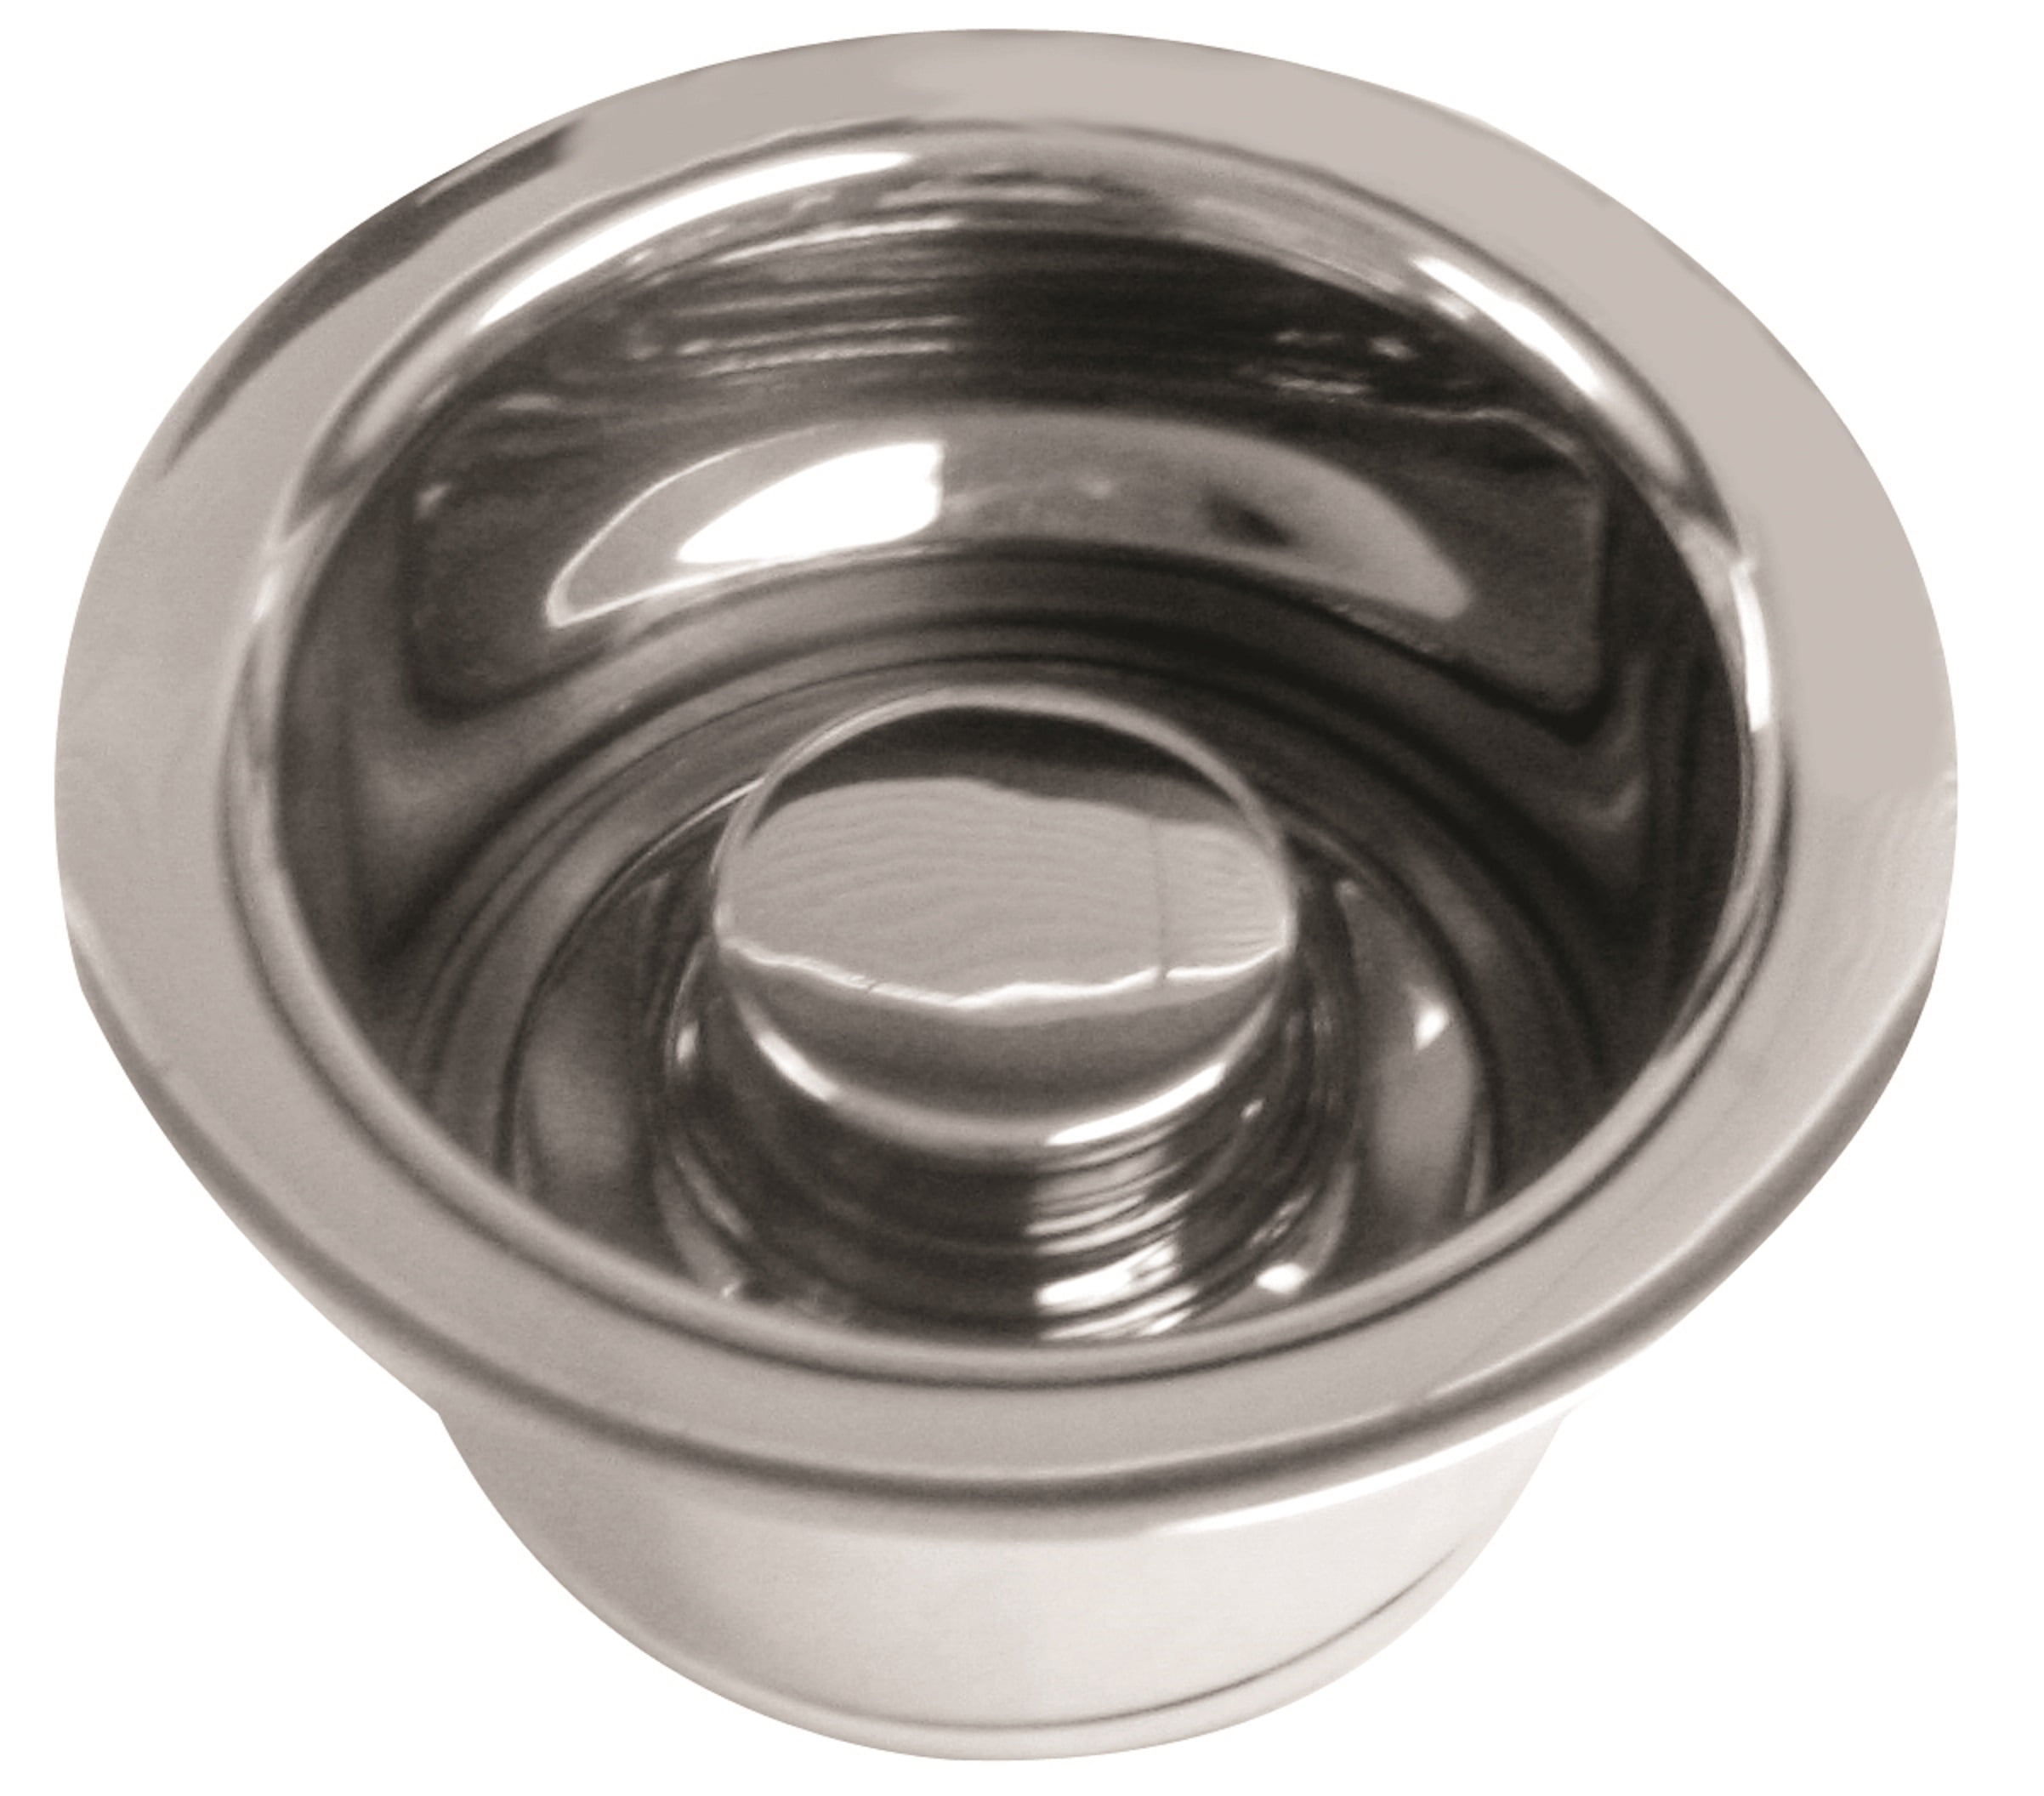 Westbrass InSinkErator Style Brass Disposal Stopper for Garbage Disposal Polished Nickel D209-05 